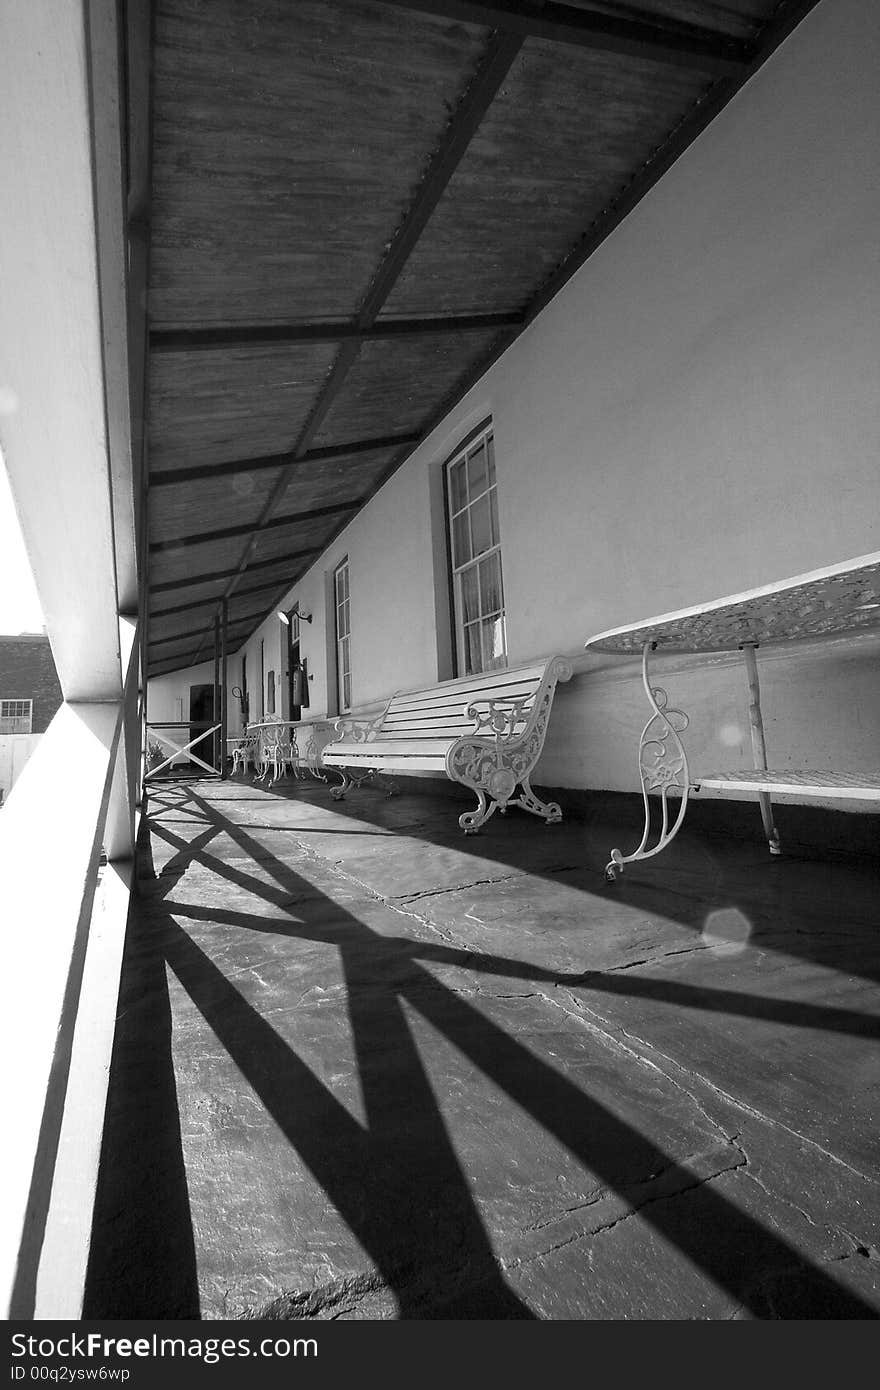 Perspective image of a patio in black and white